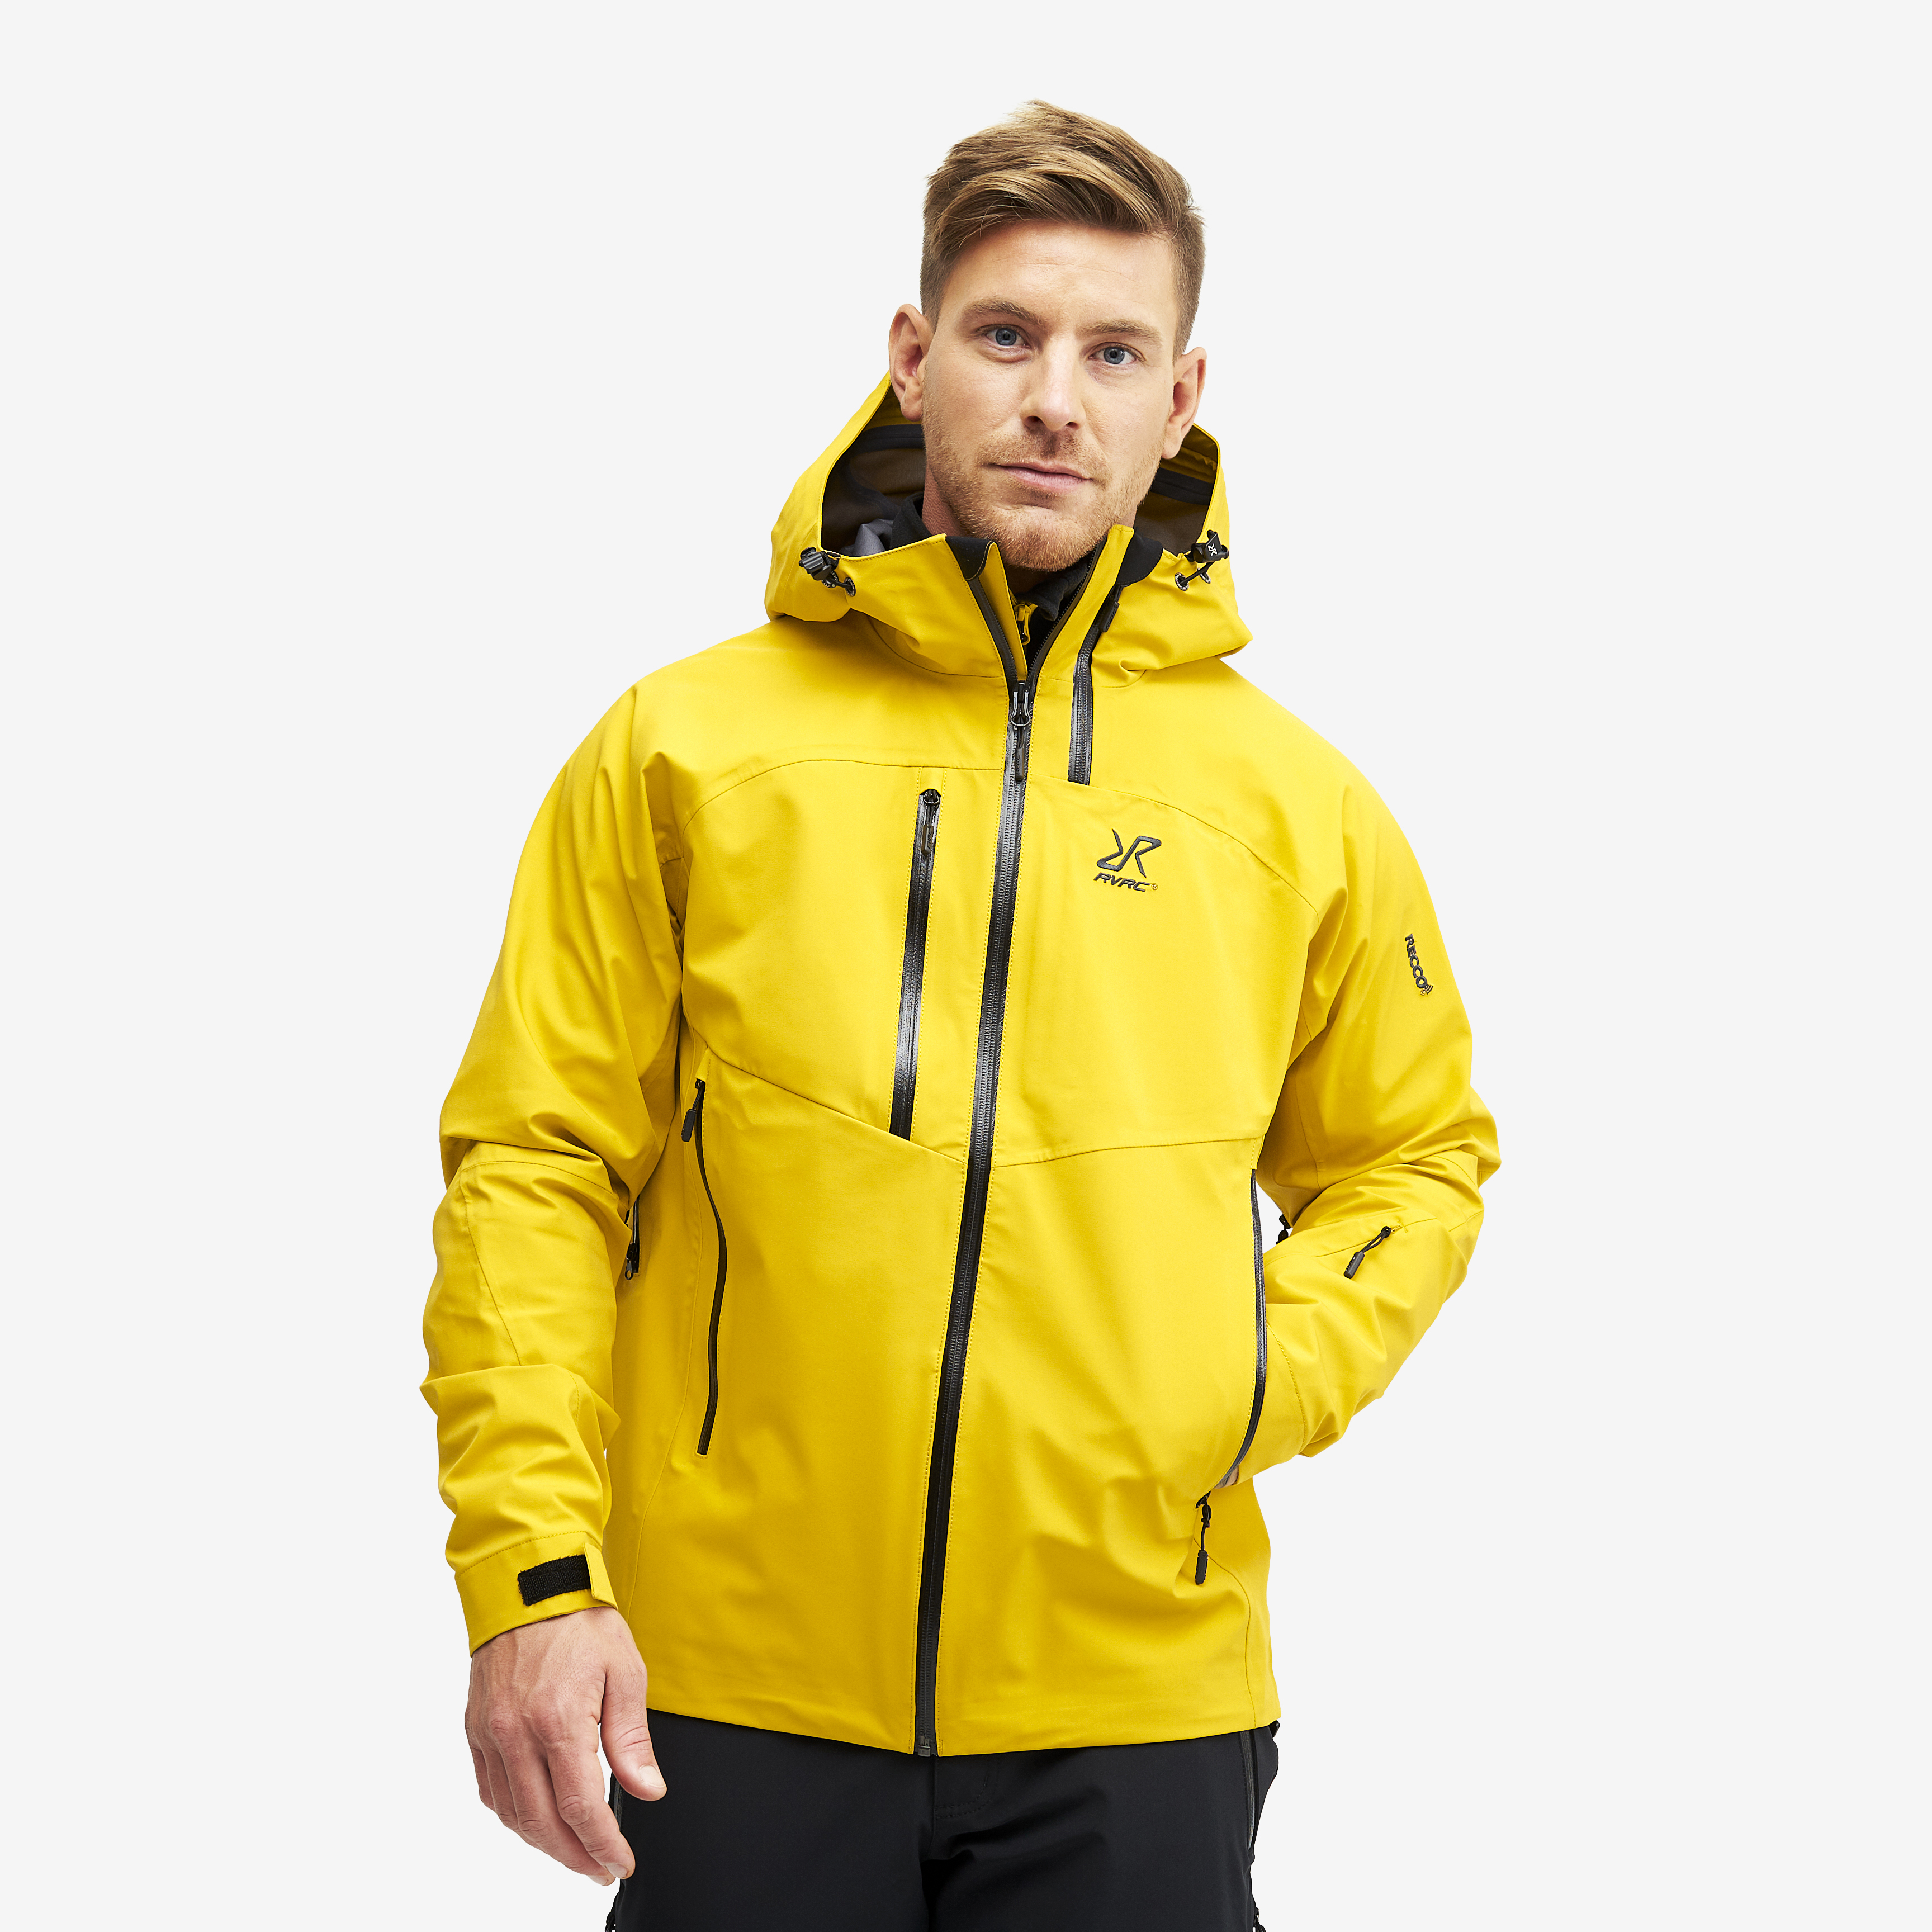 Cyclone Rescue Jacket 2.0 Lemon Curry Hombres